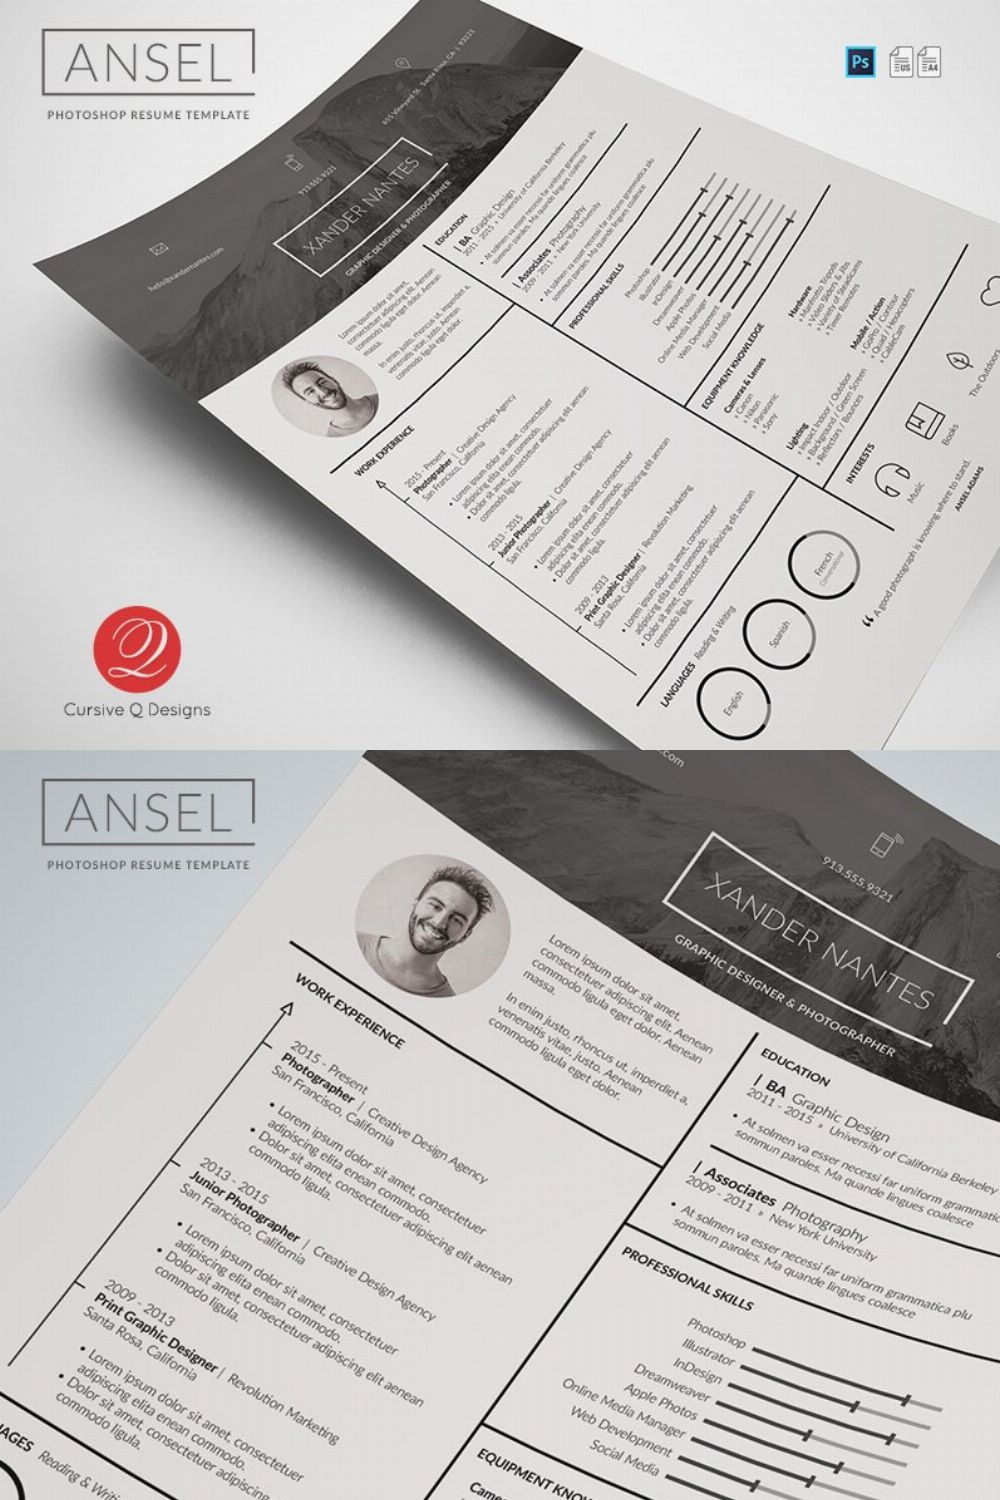 Ansel - Photoshop Resume Template pinterest preview image.